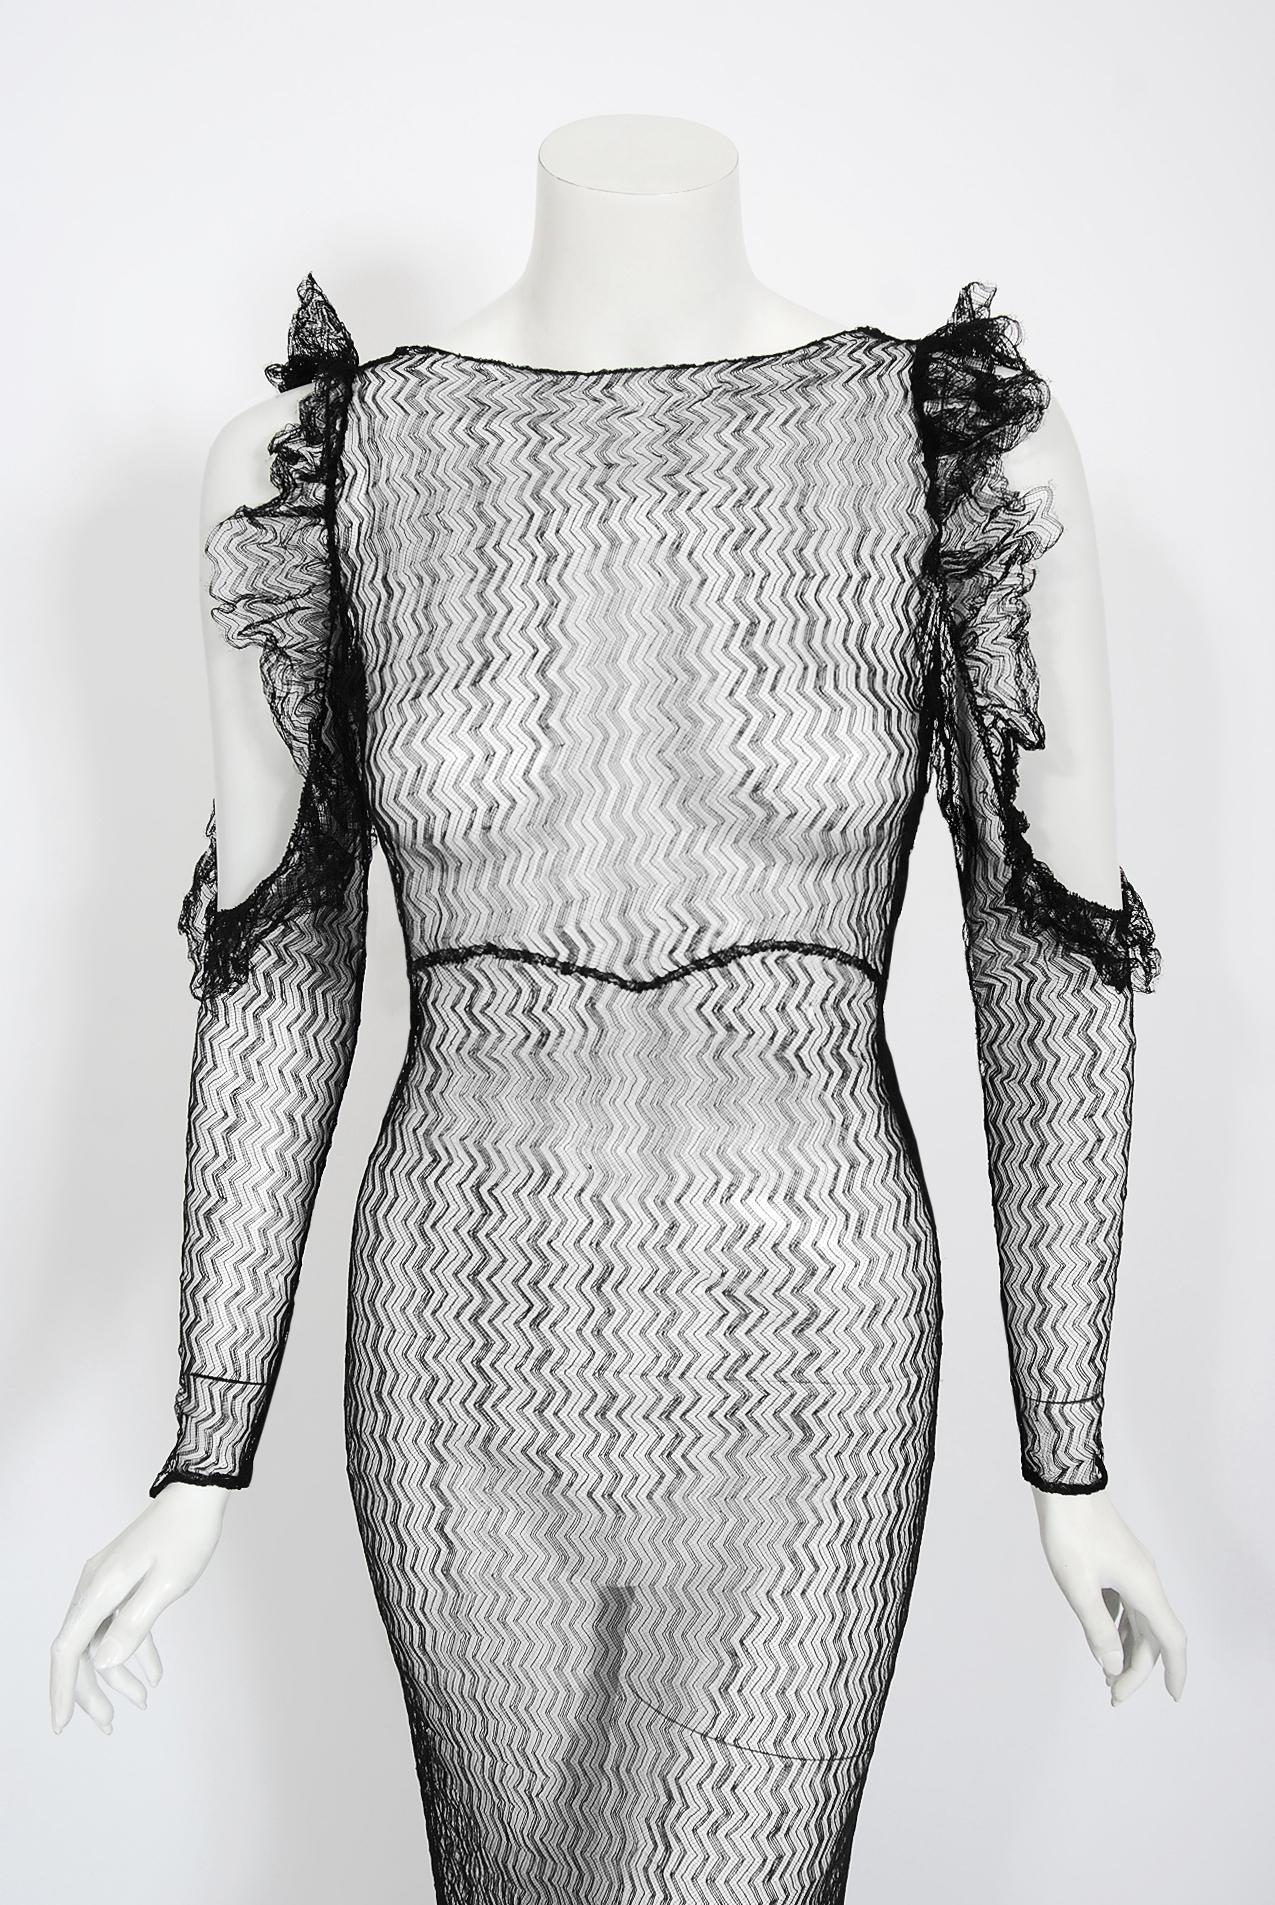 1930s gown